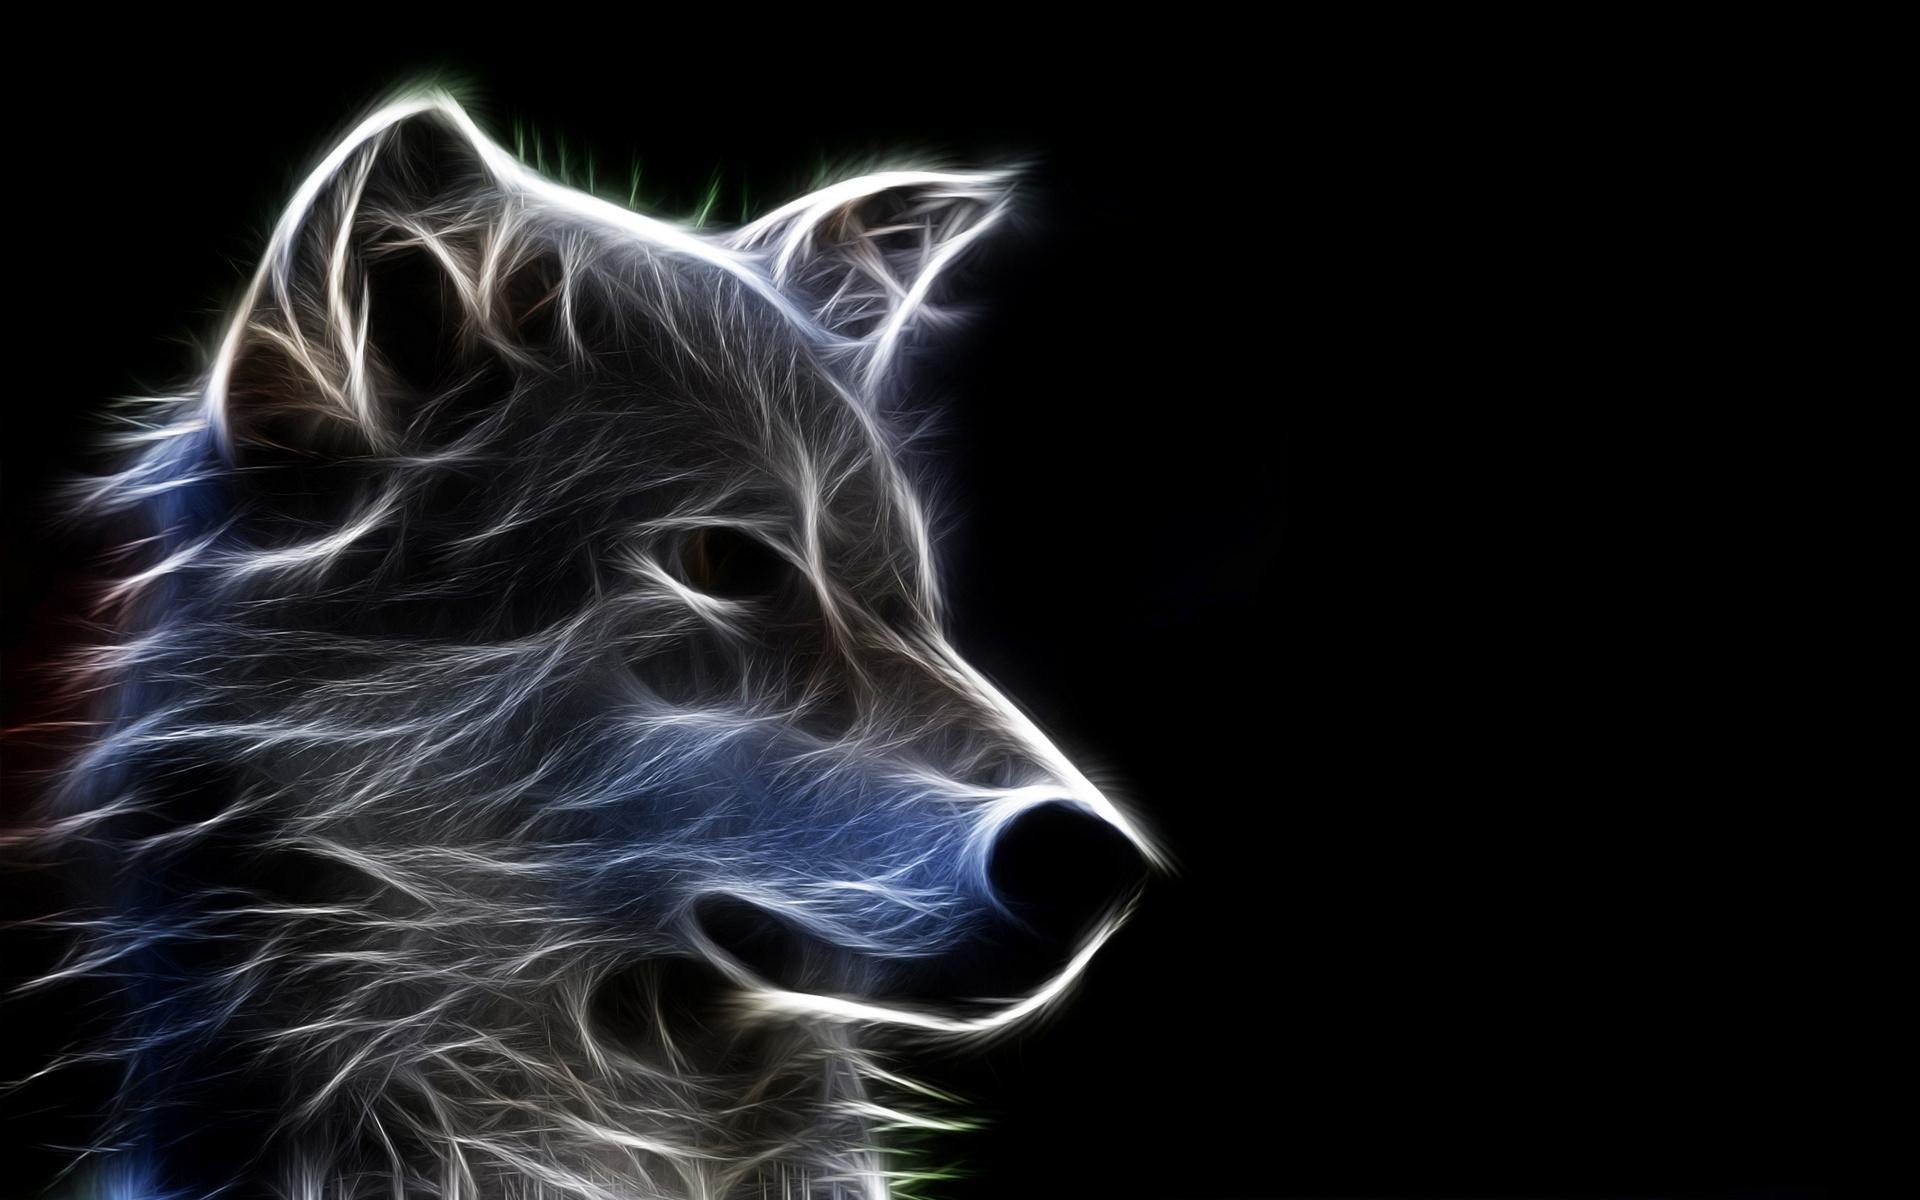 1920x1200 Abstract Wolf Art Wallpapers - http://hdwallpapersf.com/abstract-wolf